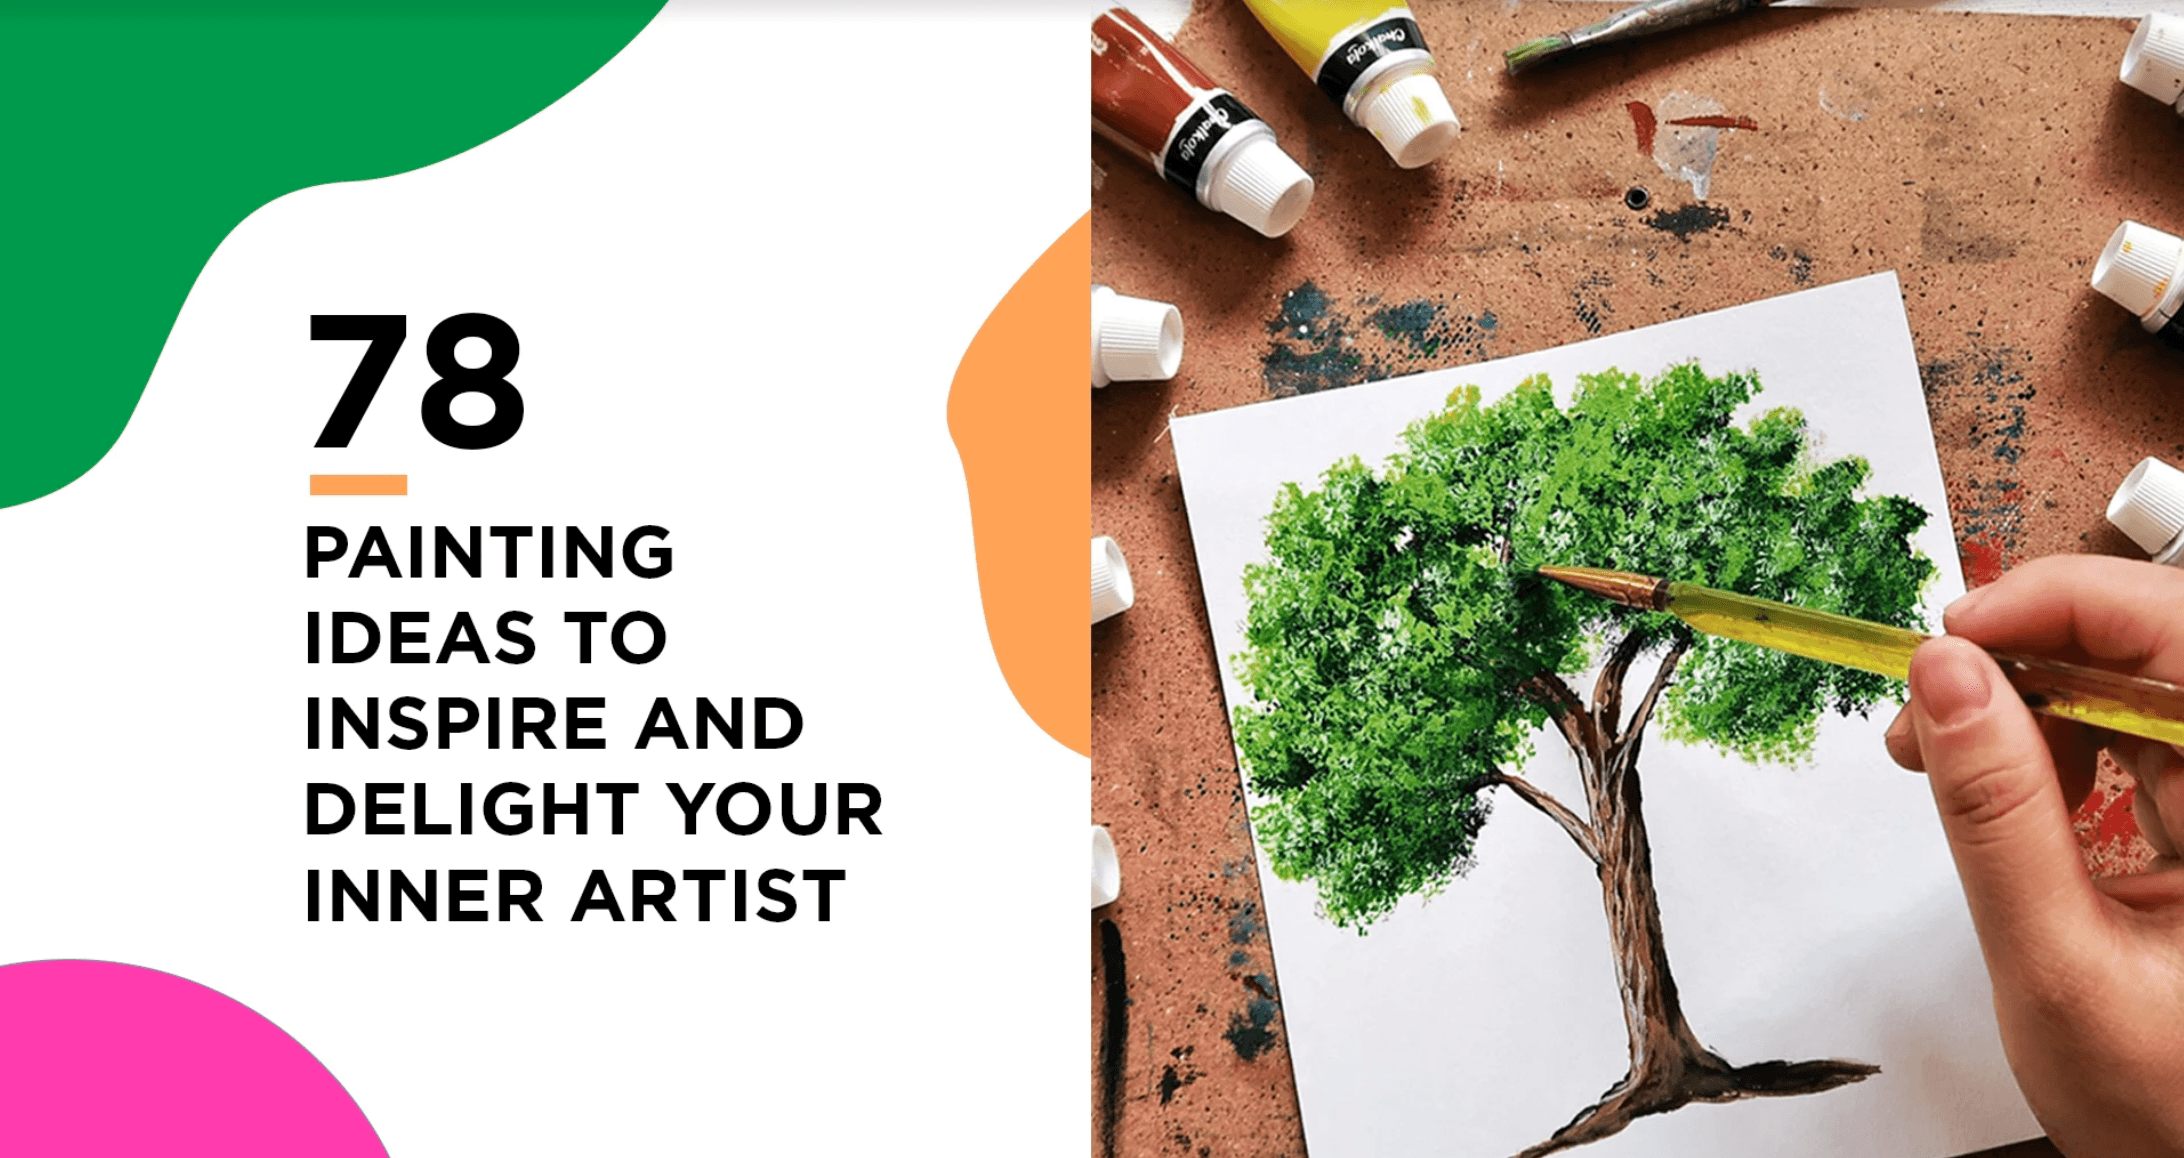 78 Painting Ideas To Inspire And Delight Your Inner Artist